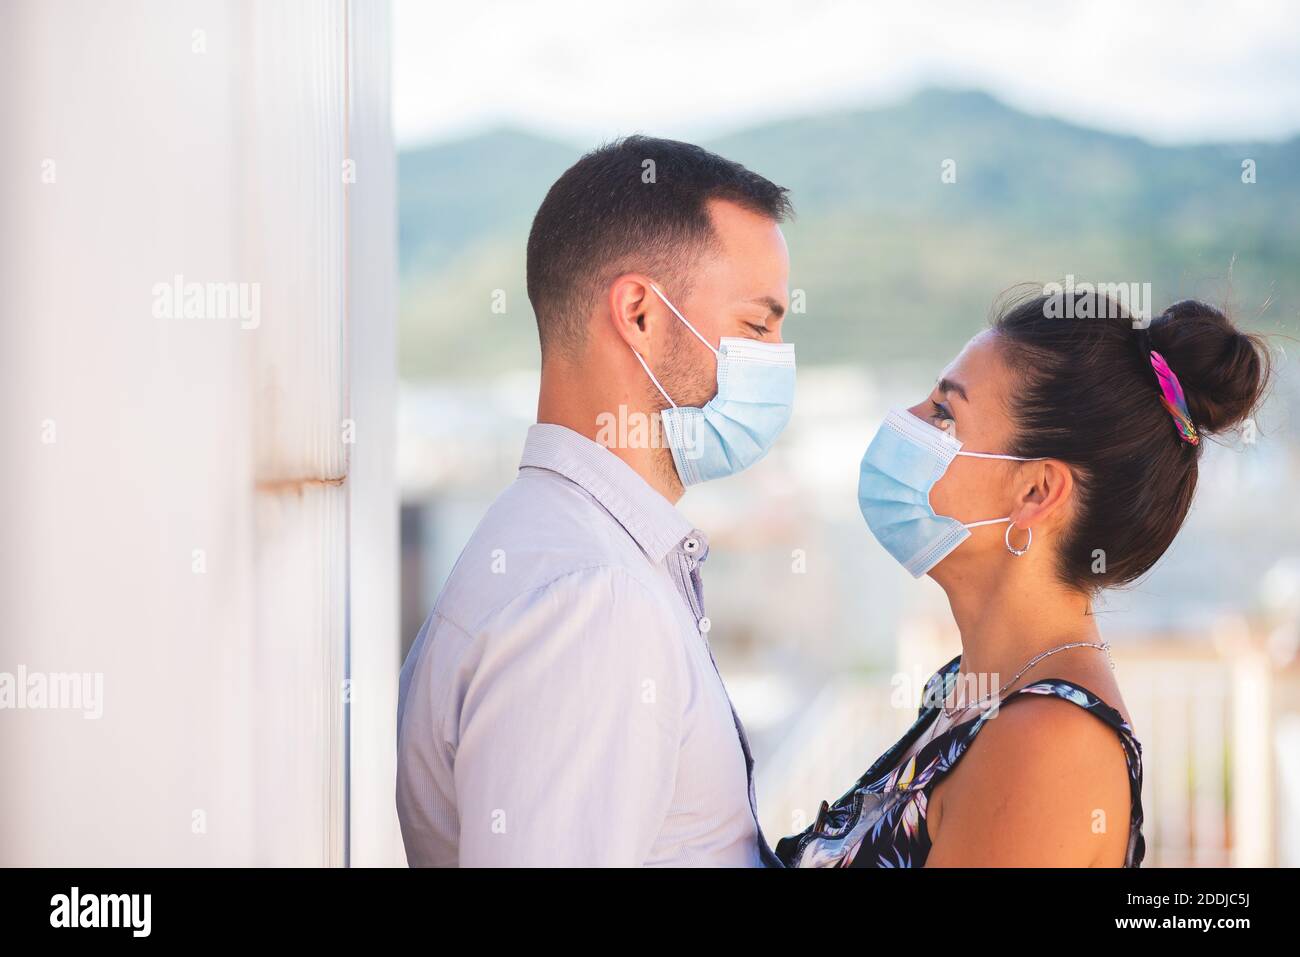 A man and a woman looking at each other with coronavirus protection masks Stock Photo